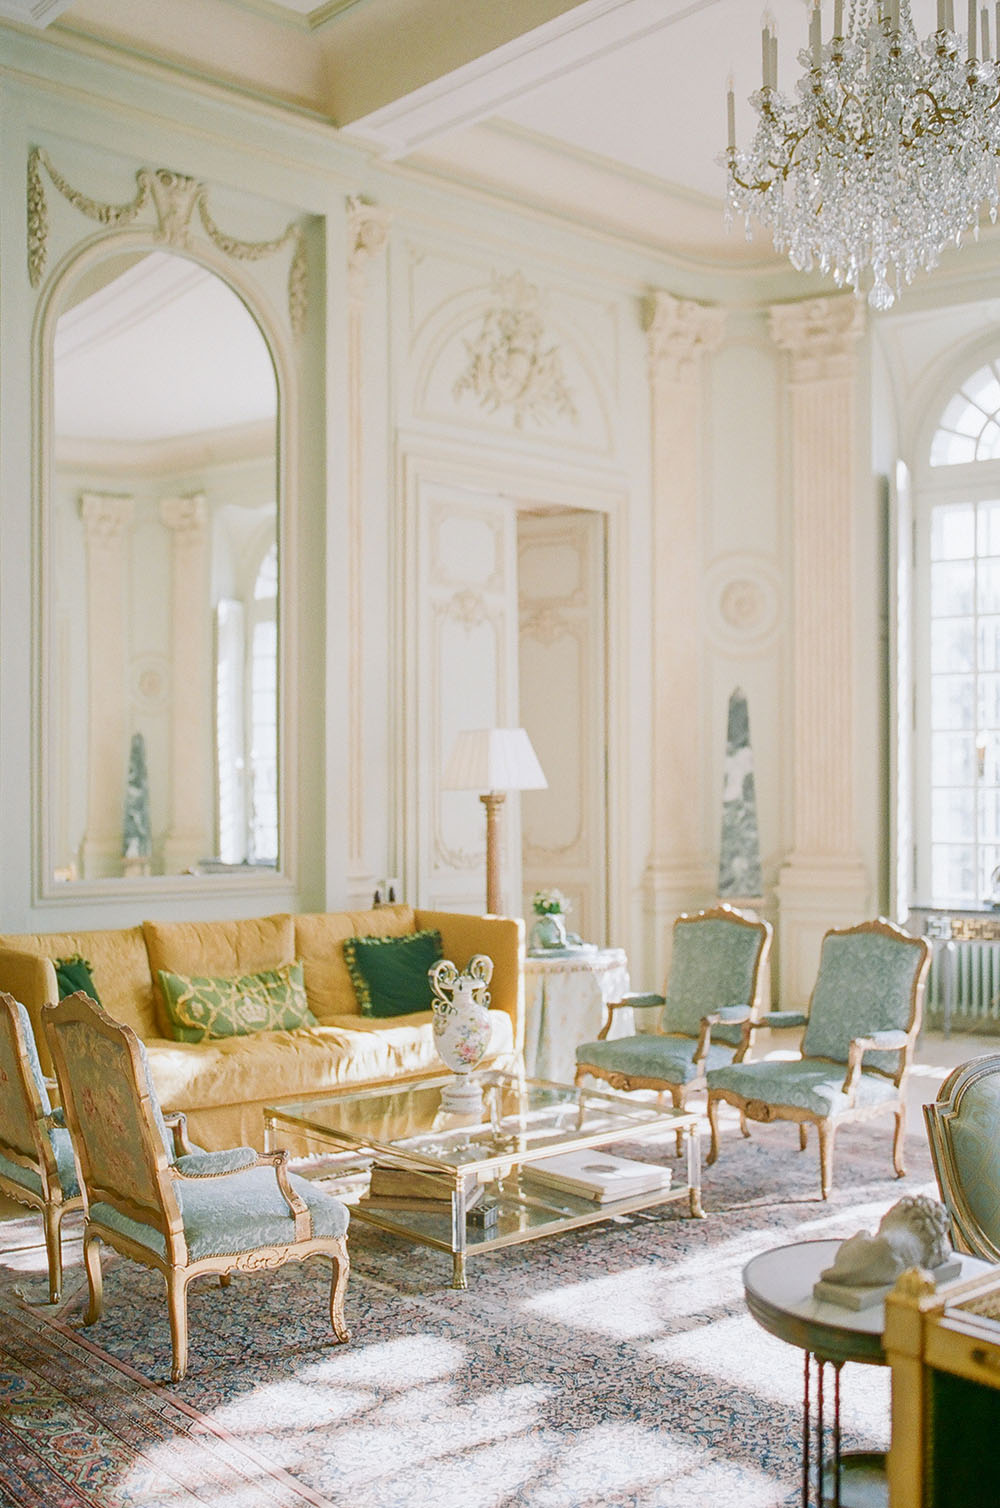 The interior salon of Chateau du Grand Luce in the Loire Valley, with antique French upholstered chairs and a mustard yellow sofa